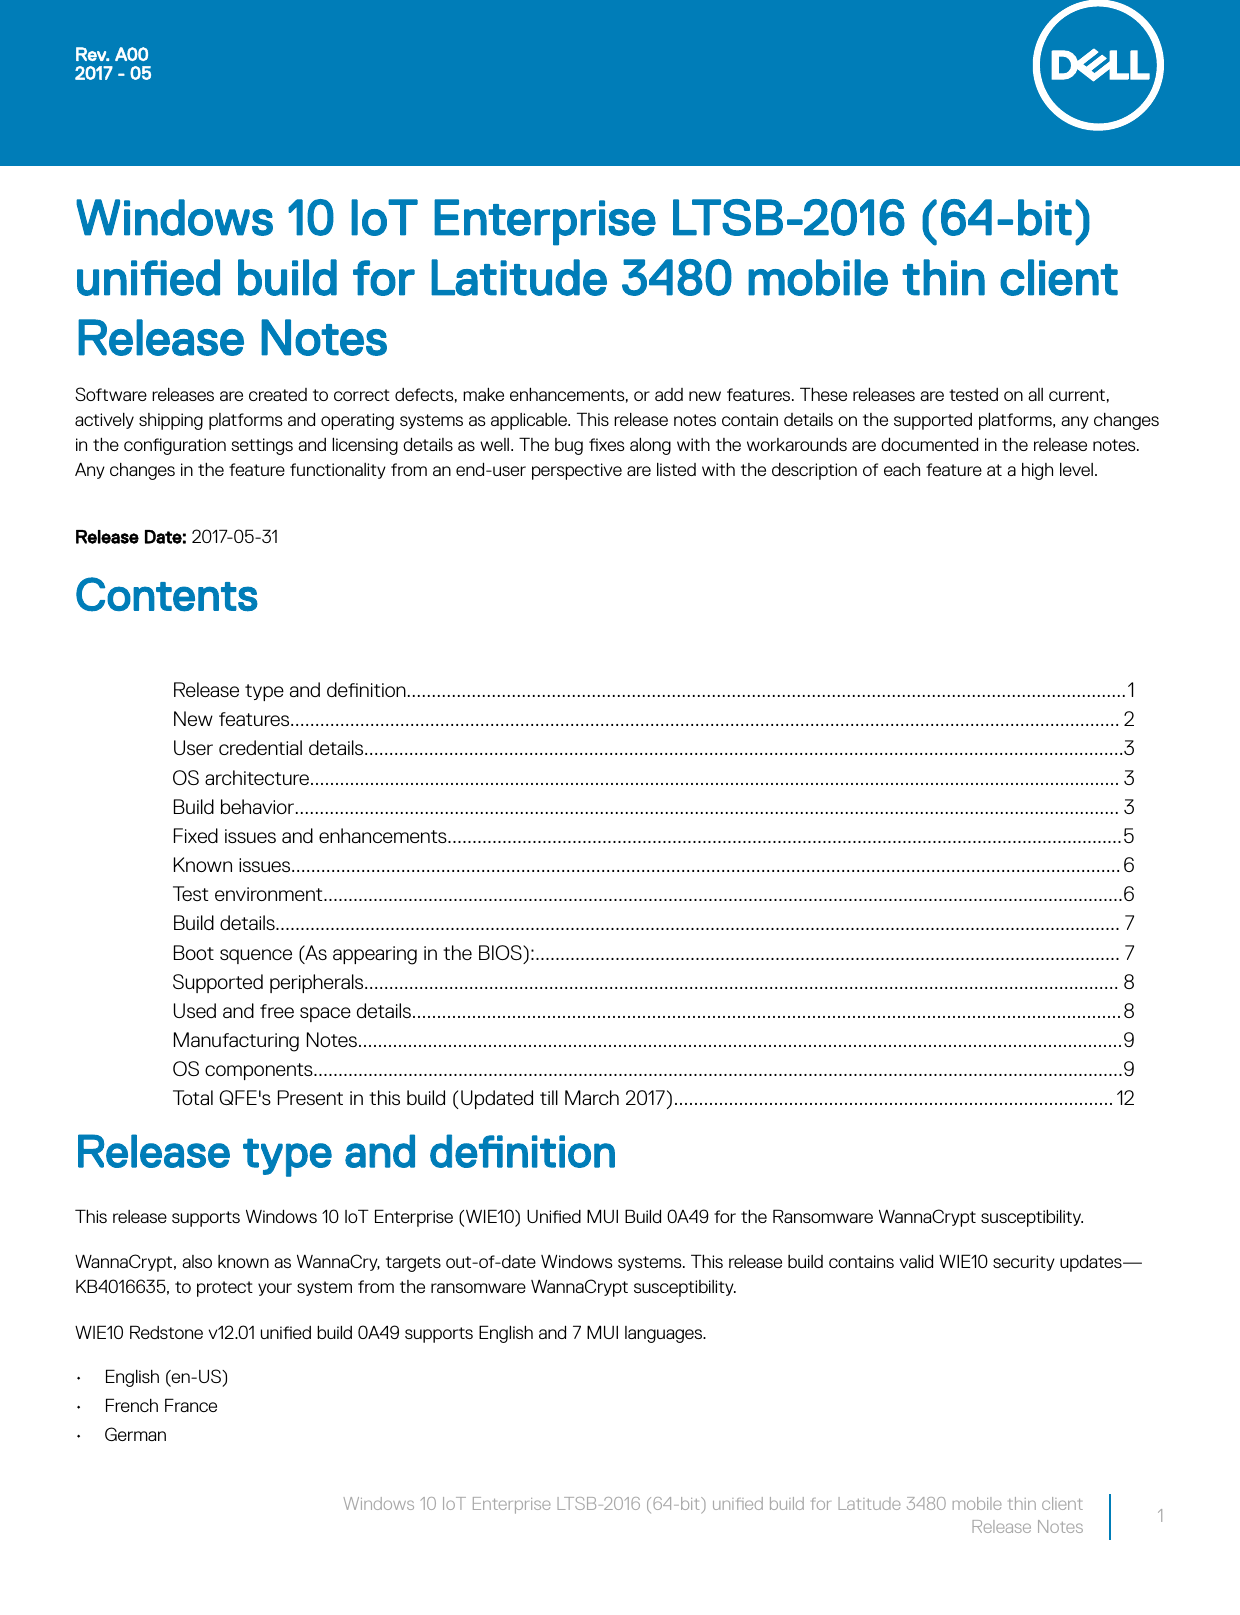 Page 1 of 12 - Dell Wyse-3480-mobile-thin-client Windows 10 IoT Enterprise LTSB-2016 (64-bit) Unified Build For Latitude 3480 Mobile Thin Client Release Notes User Manual  - Io T N Notes2 En-us